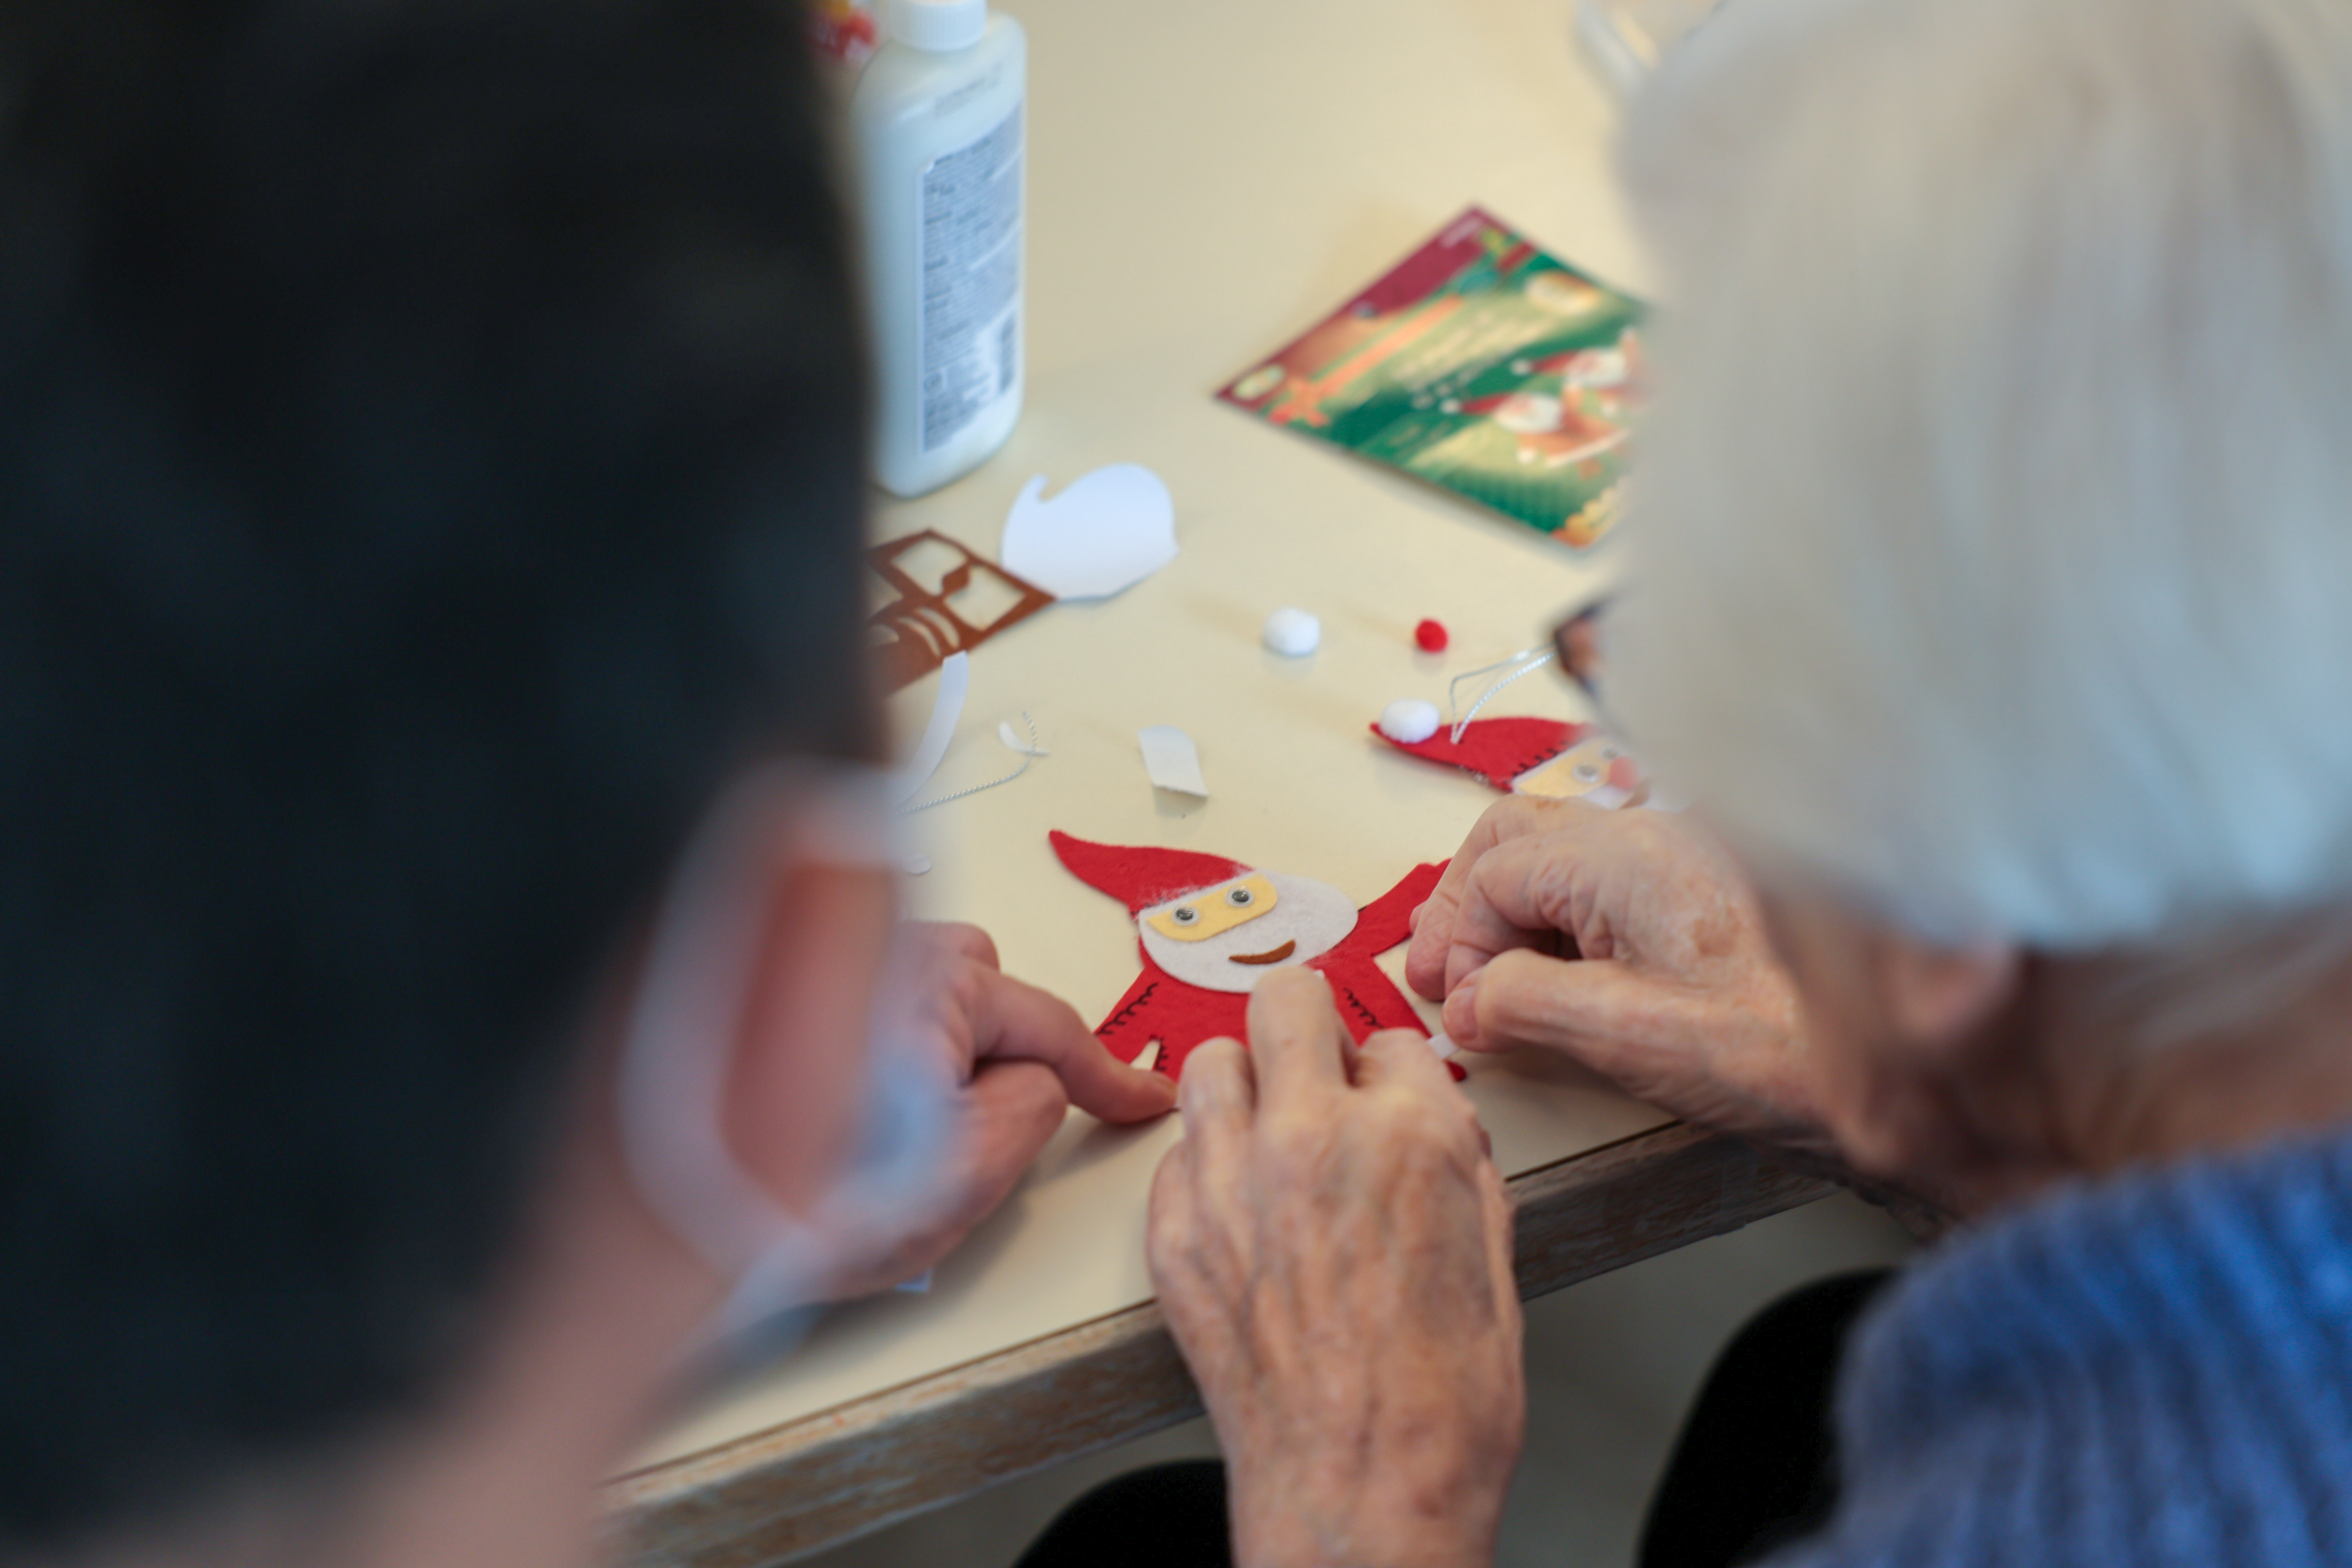 An elderly person with white hair works on a Christmas craft sitting next to a person with dark hair